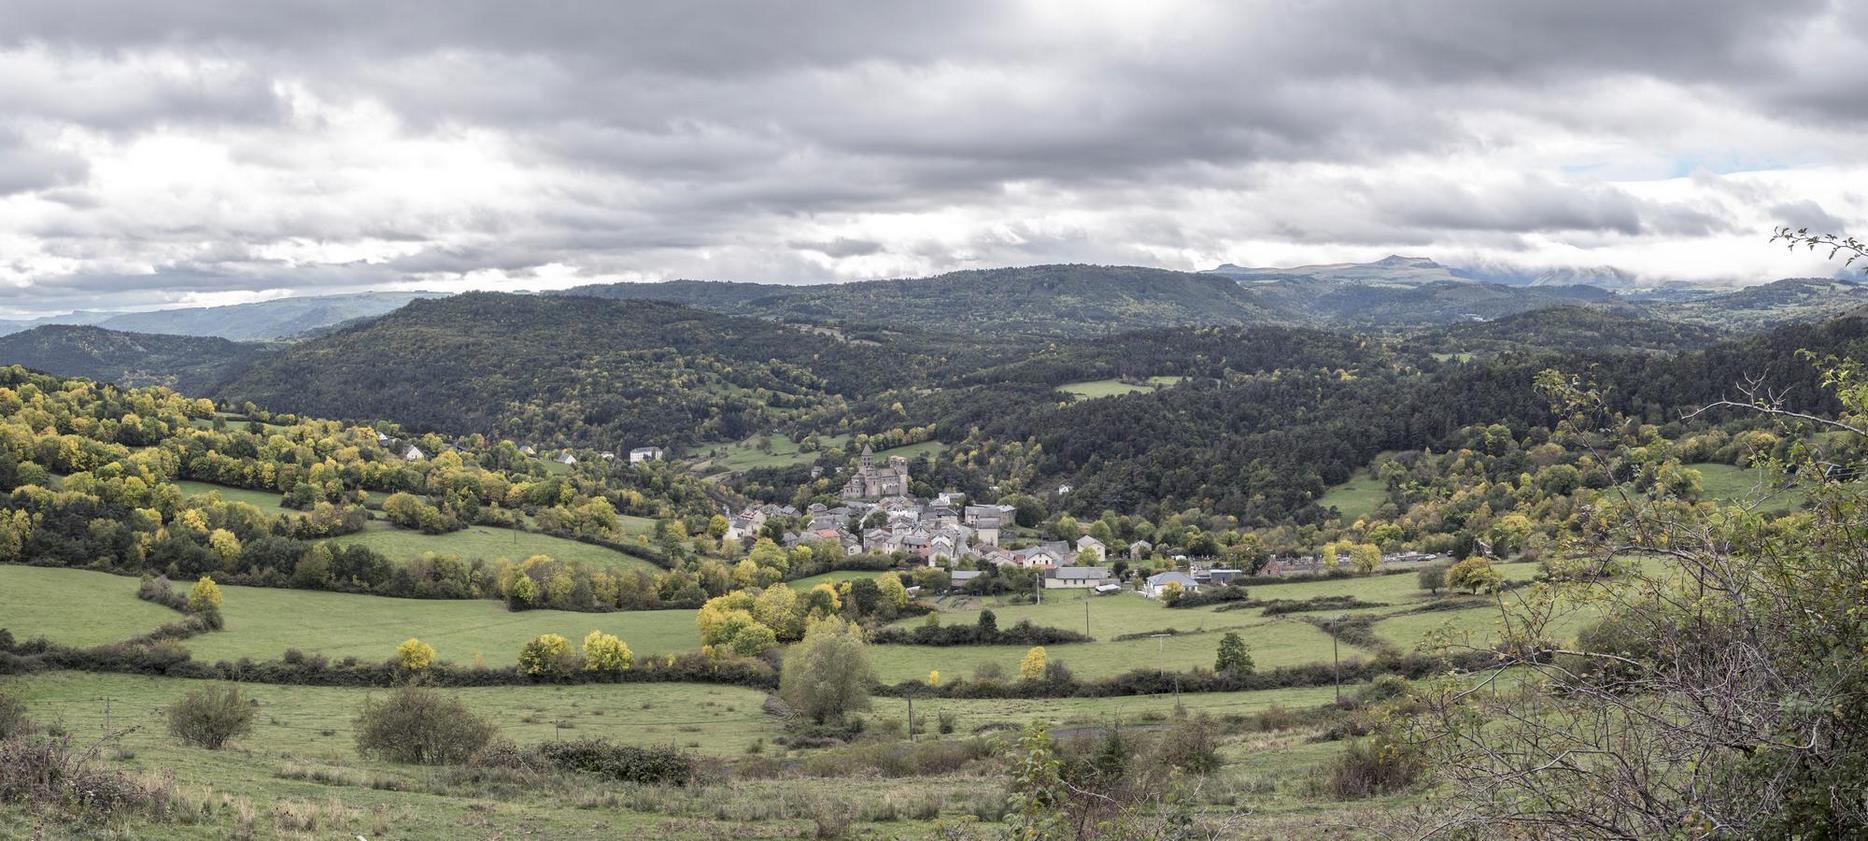 Saint Nectaire - The Village in the Auvergne countryside